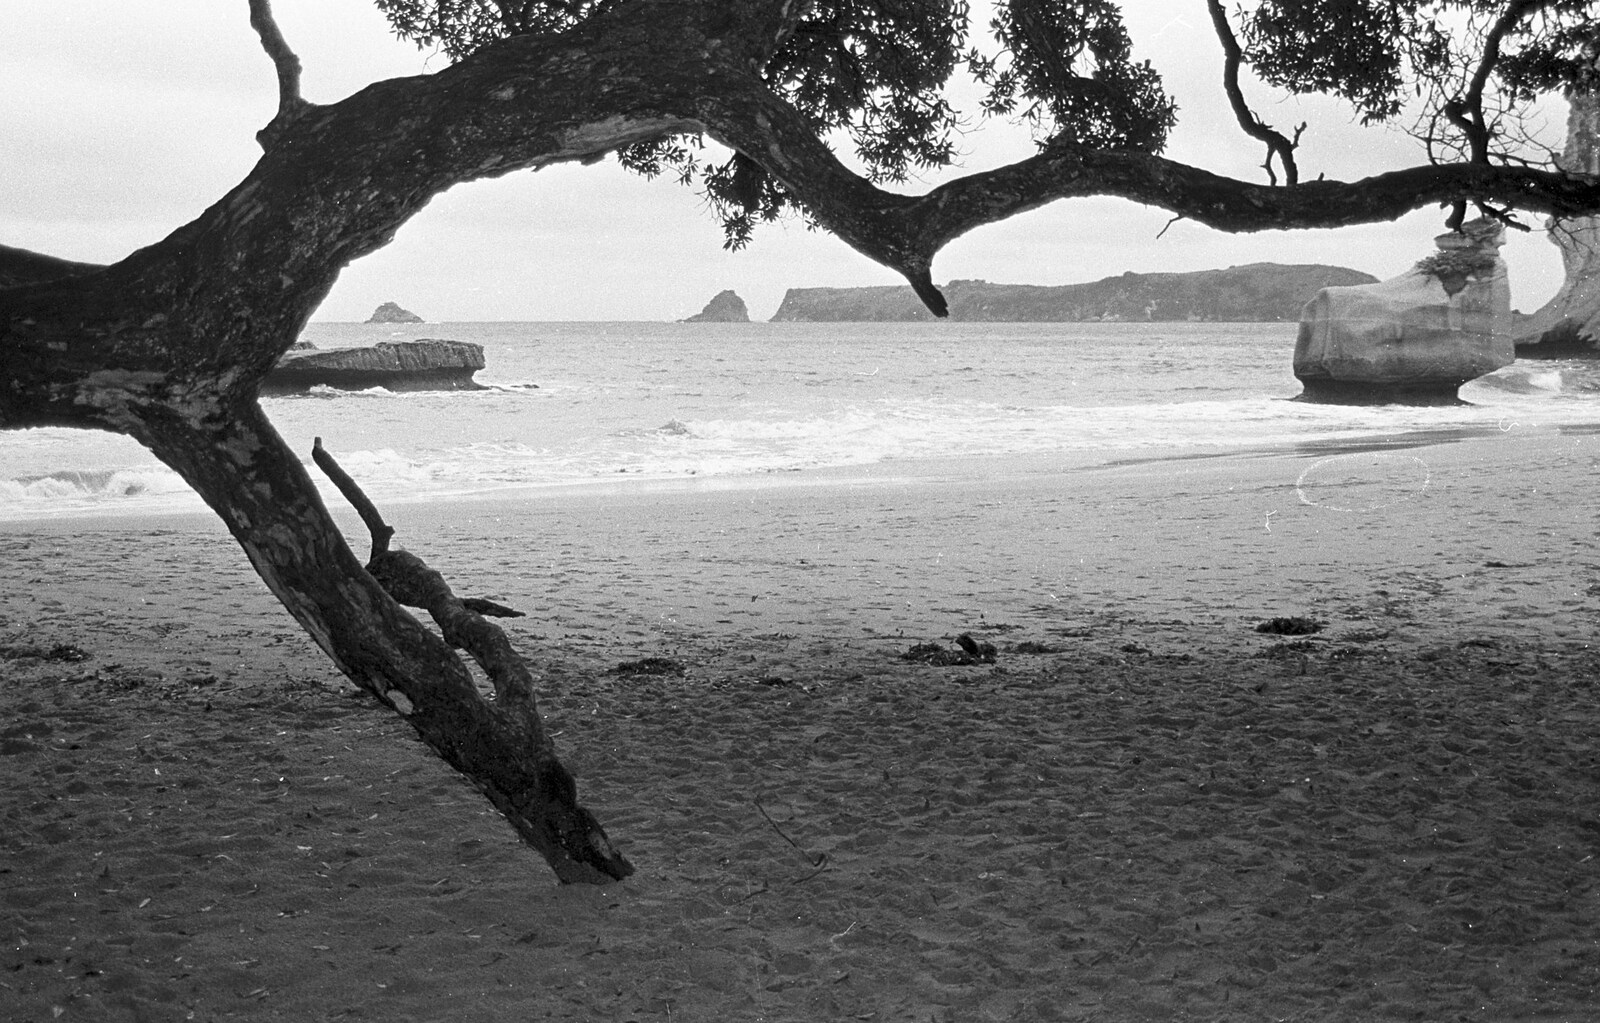 A tree on the beach from Ferry Landing, Whitianga, New Zealand - 23rd November 1992